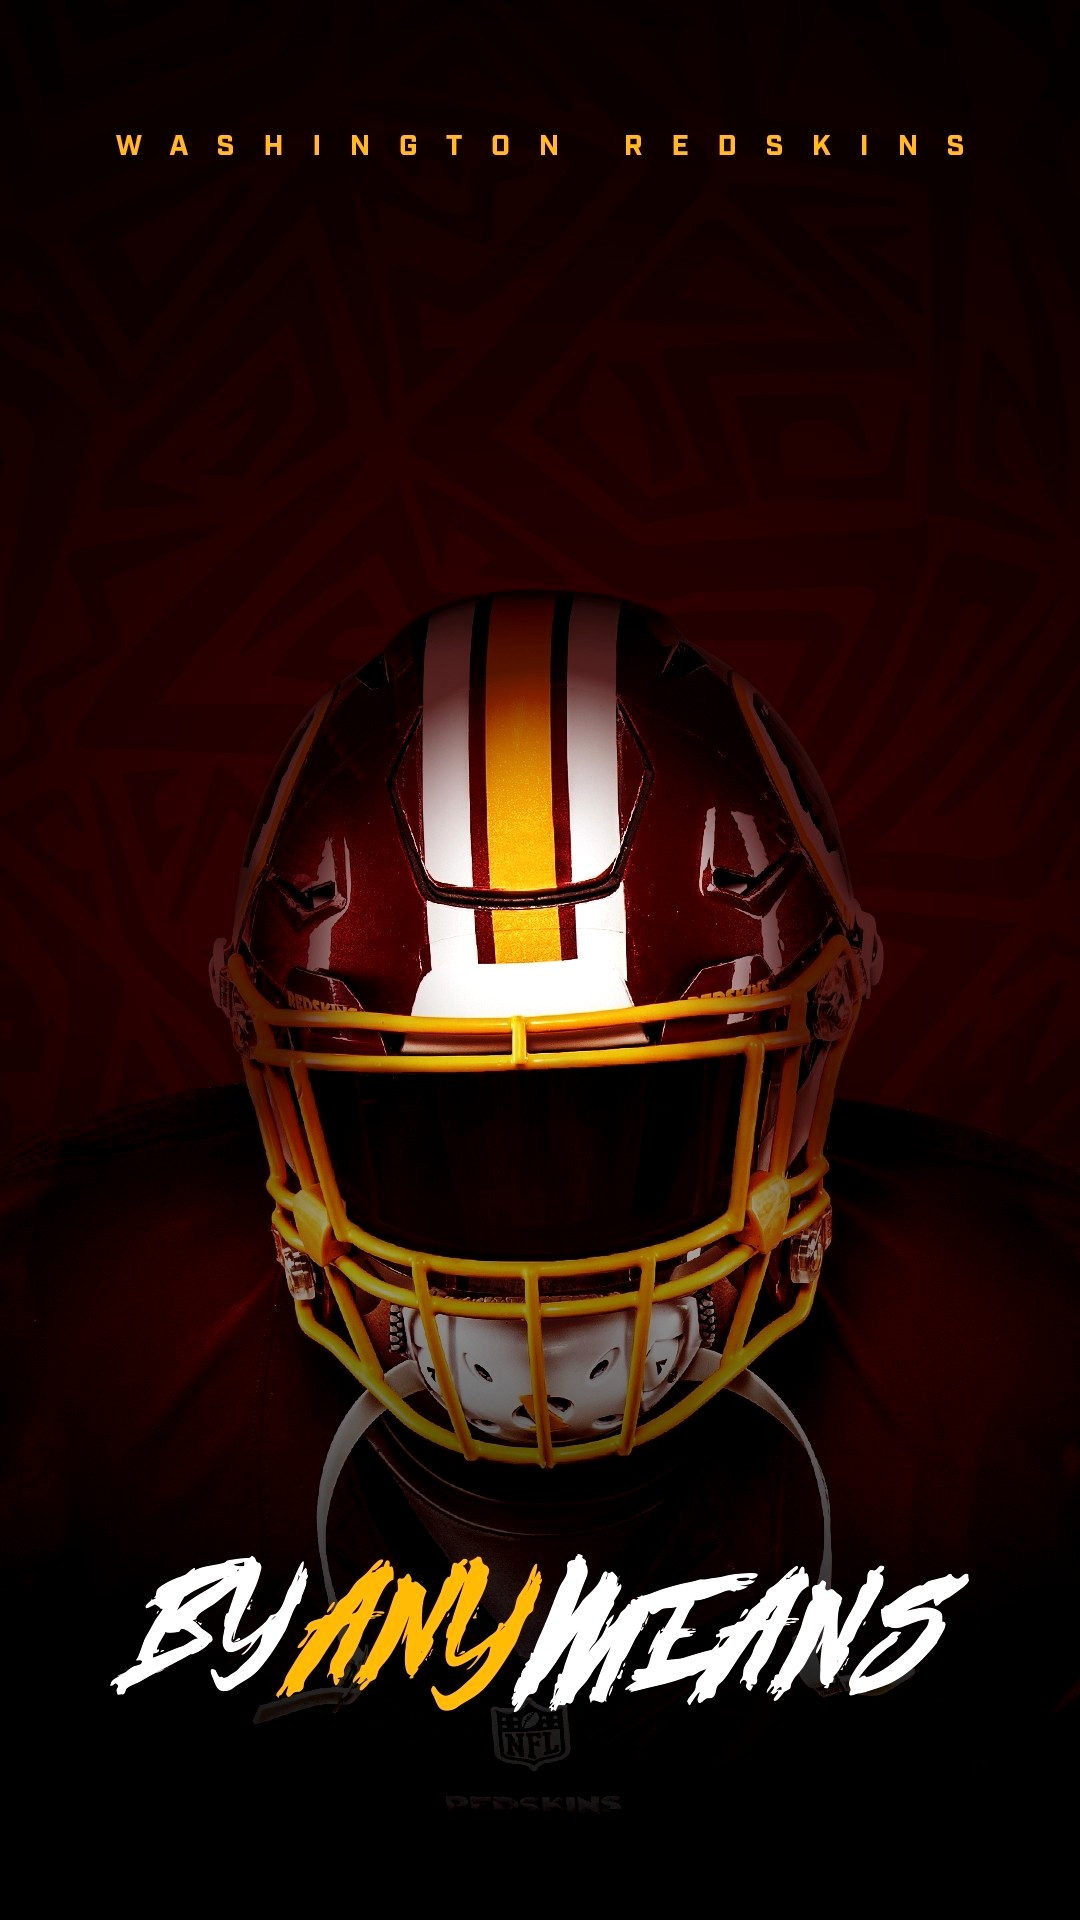 Washington Redskins Wallpaper Mobile with high-resolution 1080x1920 pixel. You can use and set as wallpaper for Notebook Screensavers, Mac Wallpapers, Mobile Home Screen, iPhone or Android Phones Lock Screen